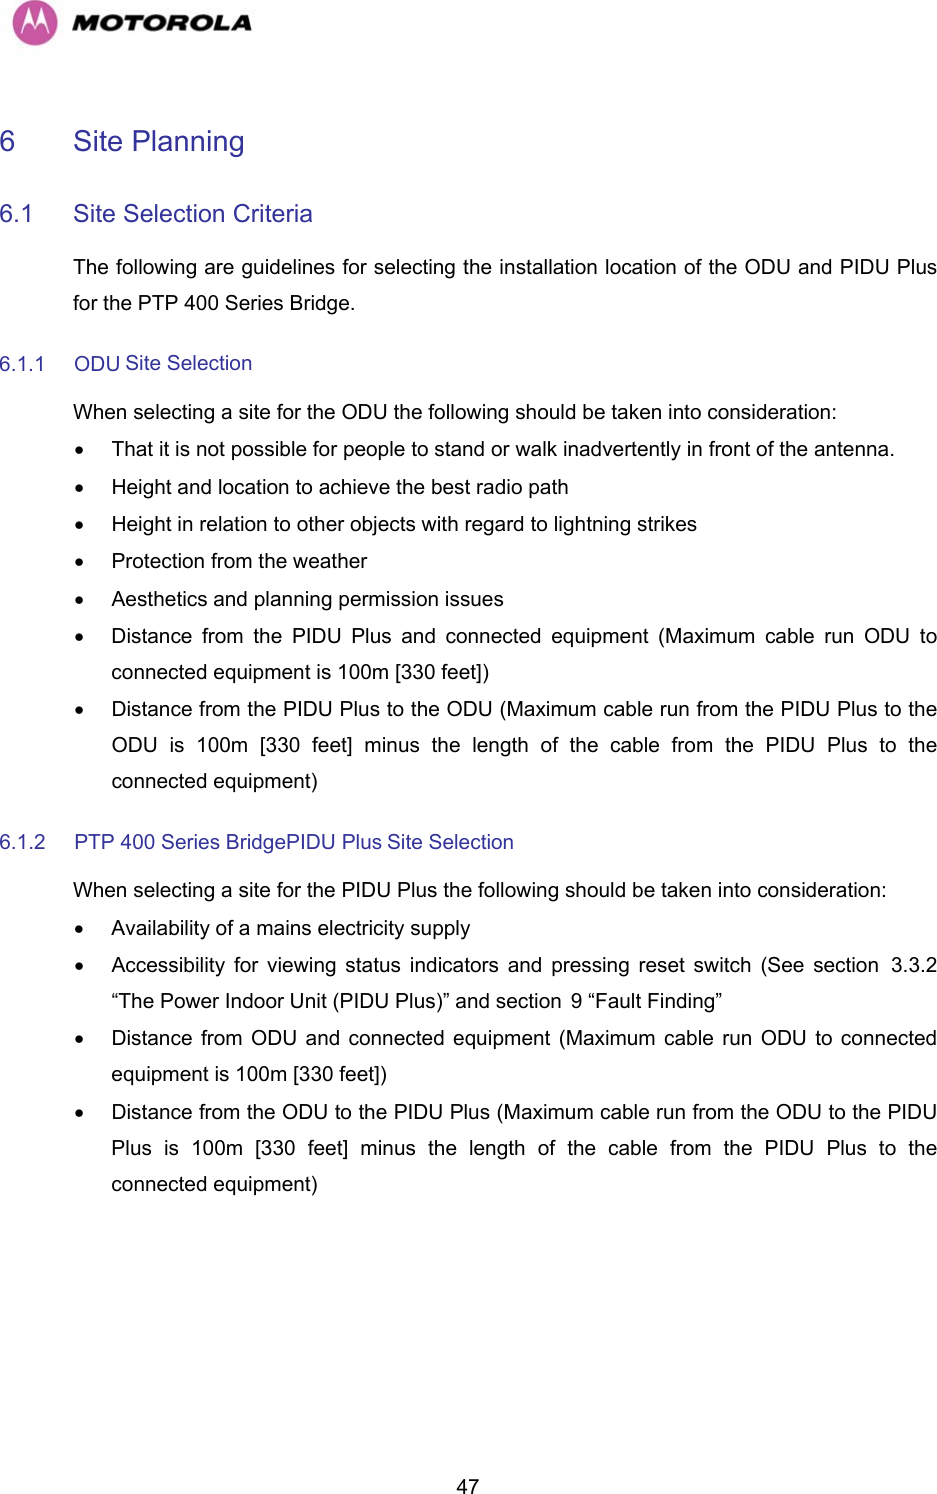   476 Site Planning  6.1  Site Selection Criteria  The following are guidelines for selecting the installation location of the ODU and PIDU Plus for the PTP 400 Series Bridge.  6.1.1 ODU Site Selection  When selecting a site for the ODU the following should be taken into consideration:  •  That it is not possible for people to stand or walk inadvertently in front of the antenna.  •  Height and location to achieve the best radio path  •  Height in relation to other objects with regard to lightning strikes  •  Protection from the weather  •  Aesthetics and planning permission issues  •  Distance from the PIDU Plus and connected equipment (Maximum cable run ODU to connected equipment is 100m [330 feet])  •  Distance from the PIDU Plus to the ODU (Maximum cable run from the PIDU Plus to the ODU is 100m [330 feet] minus the length of the cable from the PIDU Plus to the connected equipment)  6.1.2  PTP 400 Series BridgePIDU Plus Site Selection  When selecting a site for the PIDU Plus the following should be taken into consideration:  •  Availability of a mains electricity supply  •  Accessibility for viewing status indicators and pressing reset switch (See section H3.3.2 “The Power Indoor Unit (PIDU Plus)” and section H9 “Fault Finding”  •  Distance from ODU and connected equipment (Maximum cable run ODU to connected equipment is 100m [330 feet])  •  Distance from the ODU to the PIDU Plus (Maximum cable run from the ODU to the PIDU Plus is 100m [330 feet] minus the length of the cable from the PIDU Plus to the connected equipment)  